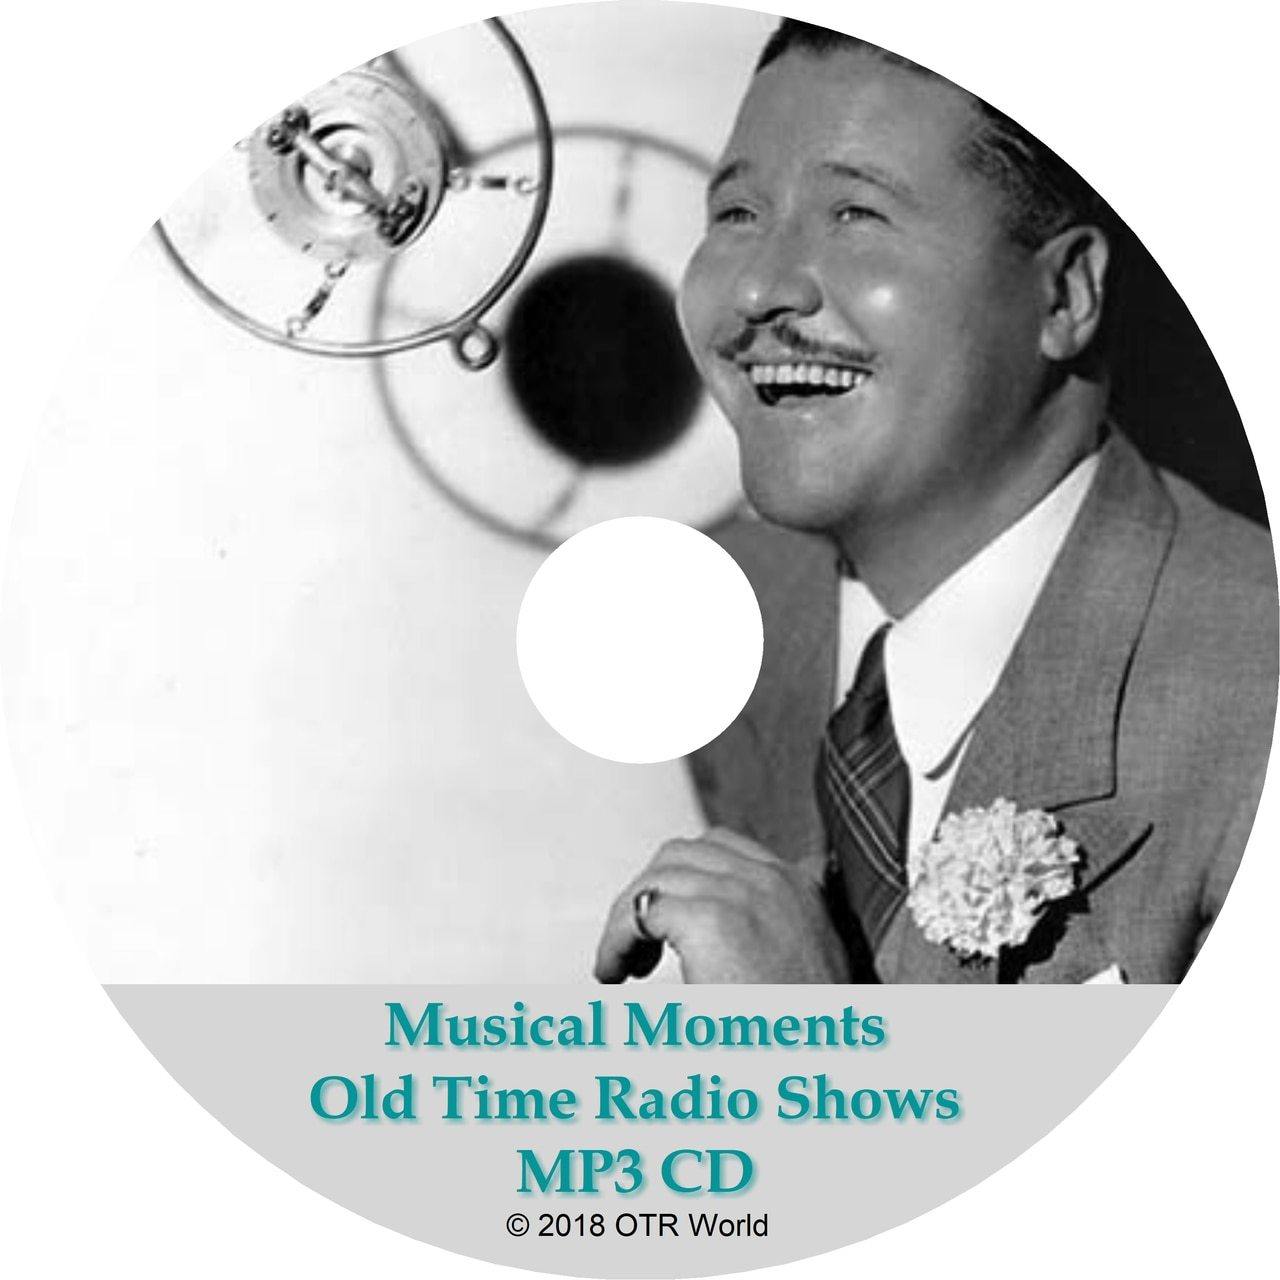 Musical Moments Old Time Radio Shows 17 Episodes On MP3 CD - OTR World